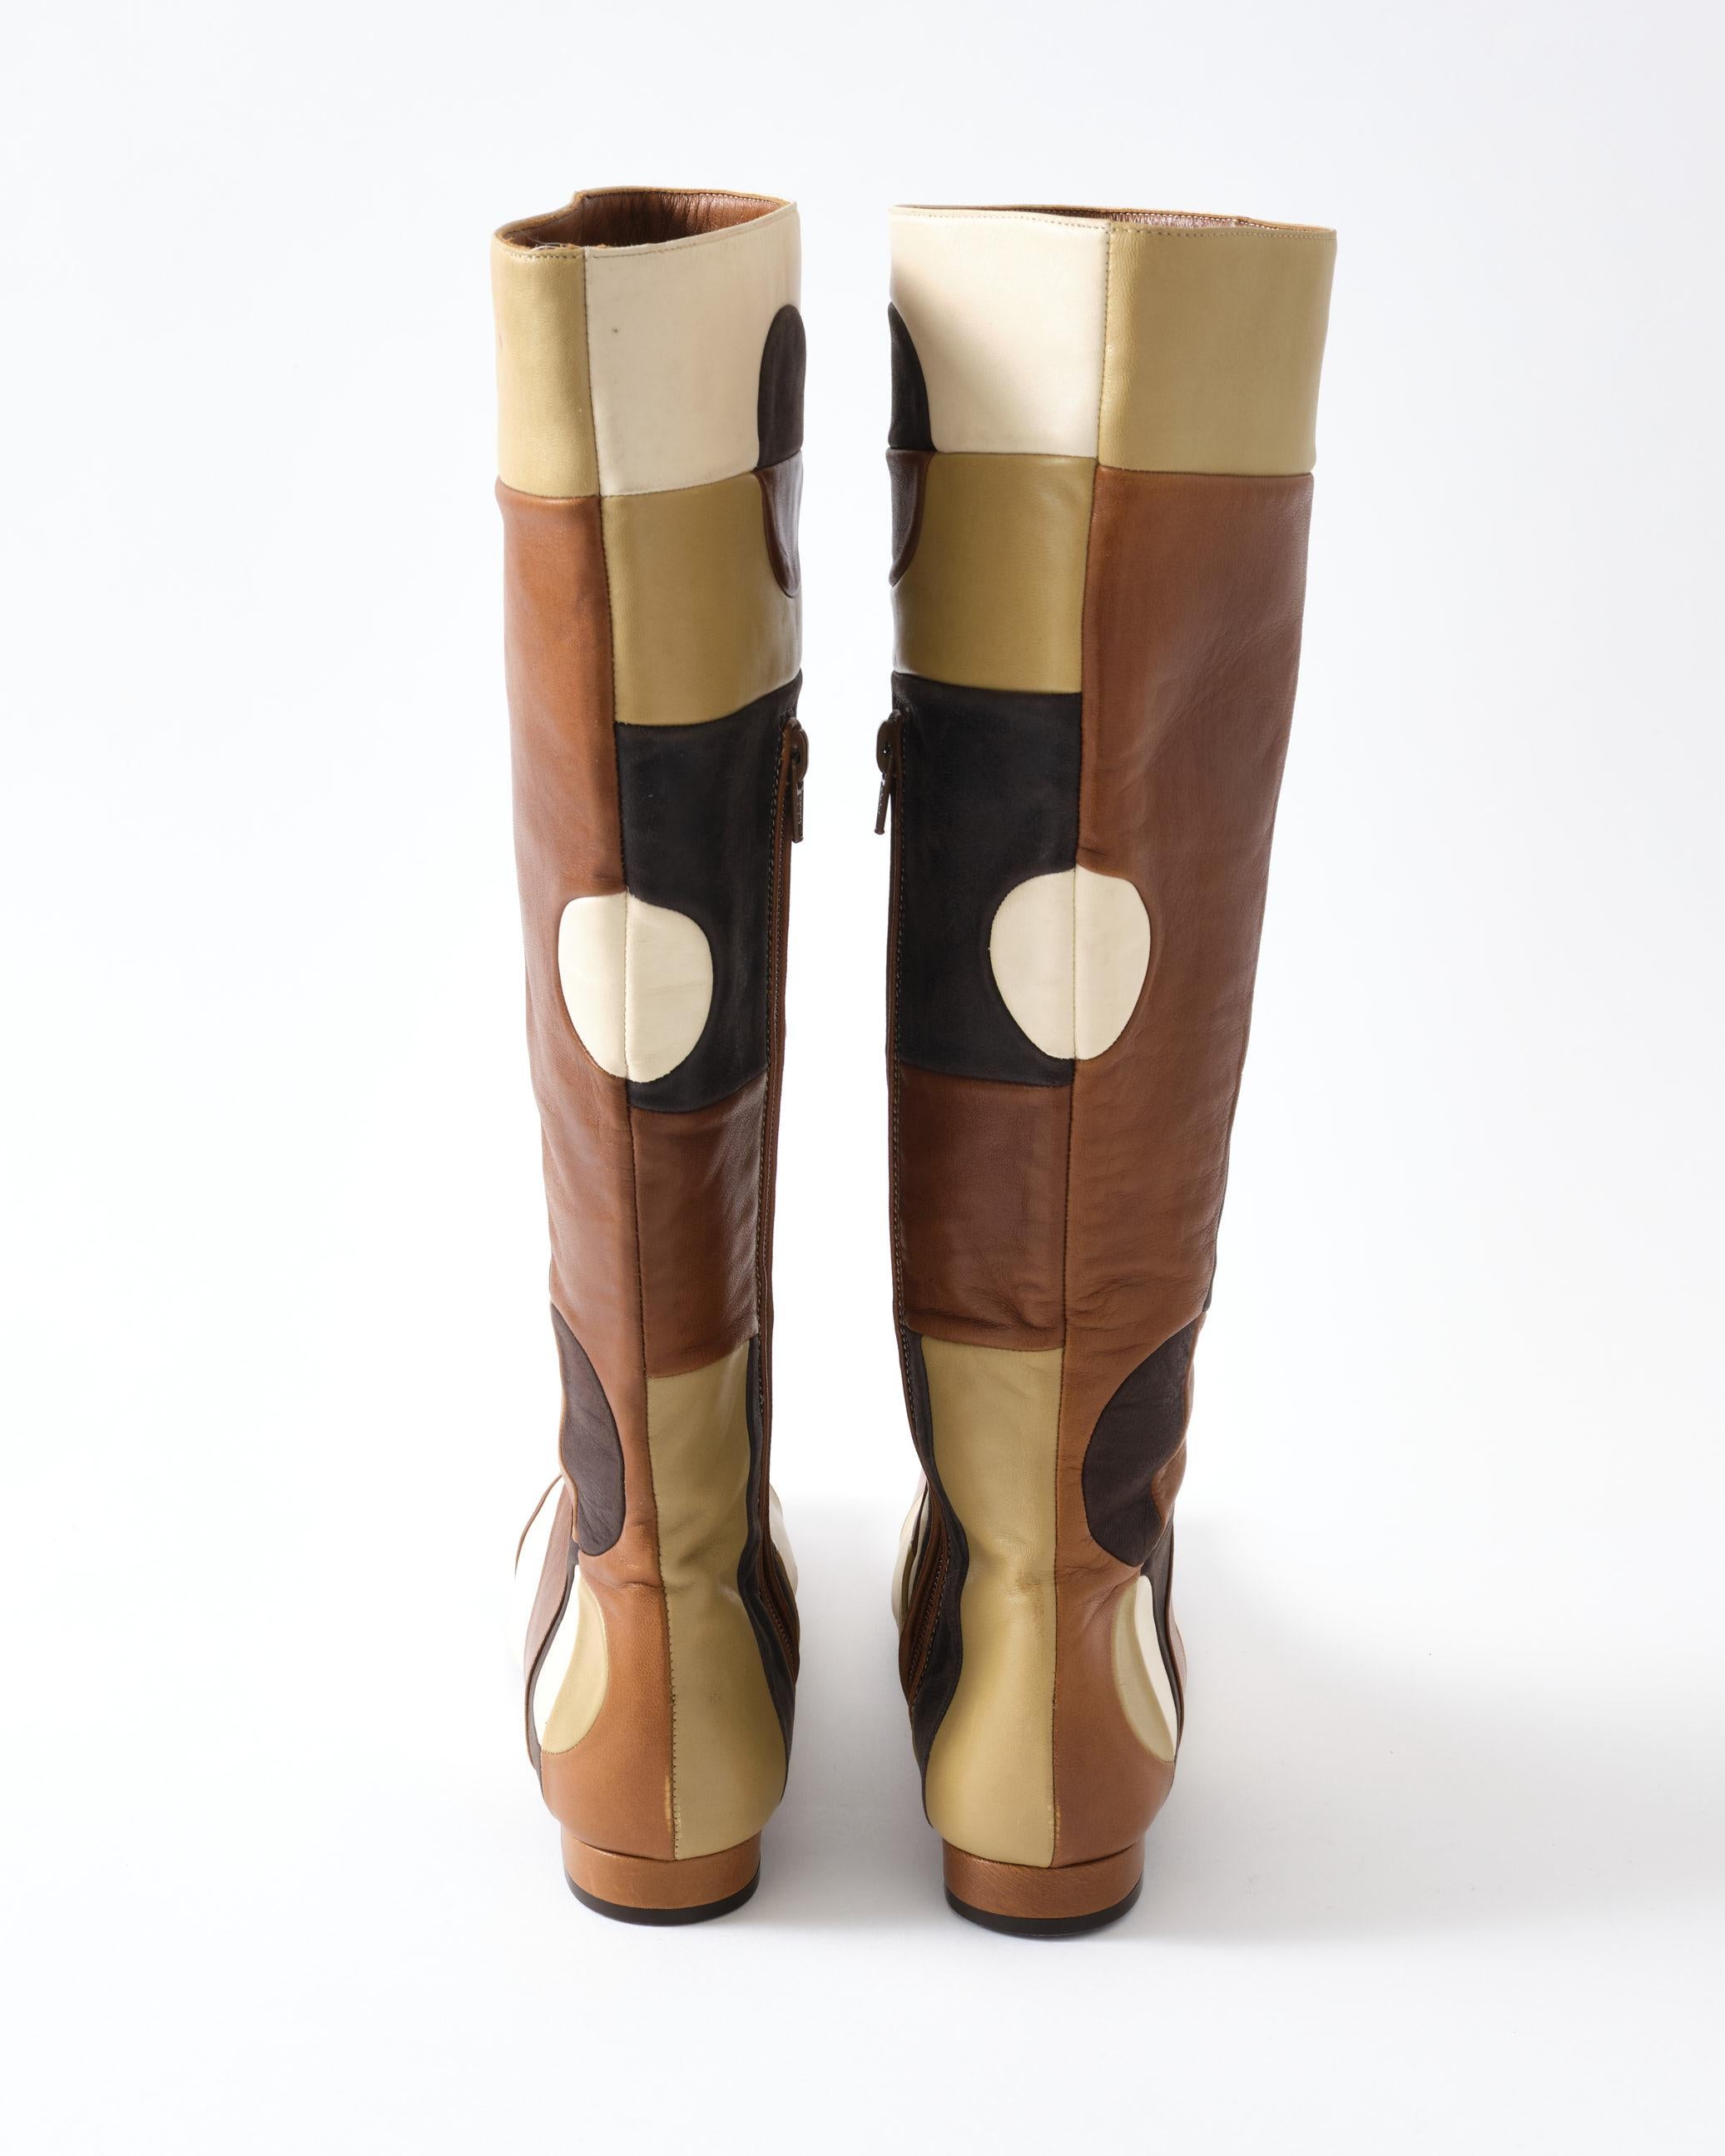 Italian Marni Leather Boots, 1960's Style Design, Brown, Beige & Khaki, Pair of Boots For Sale